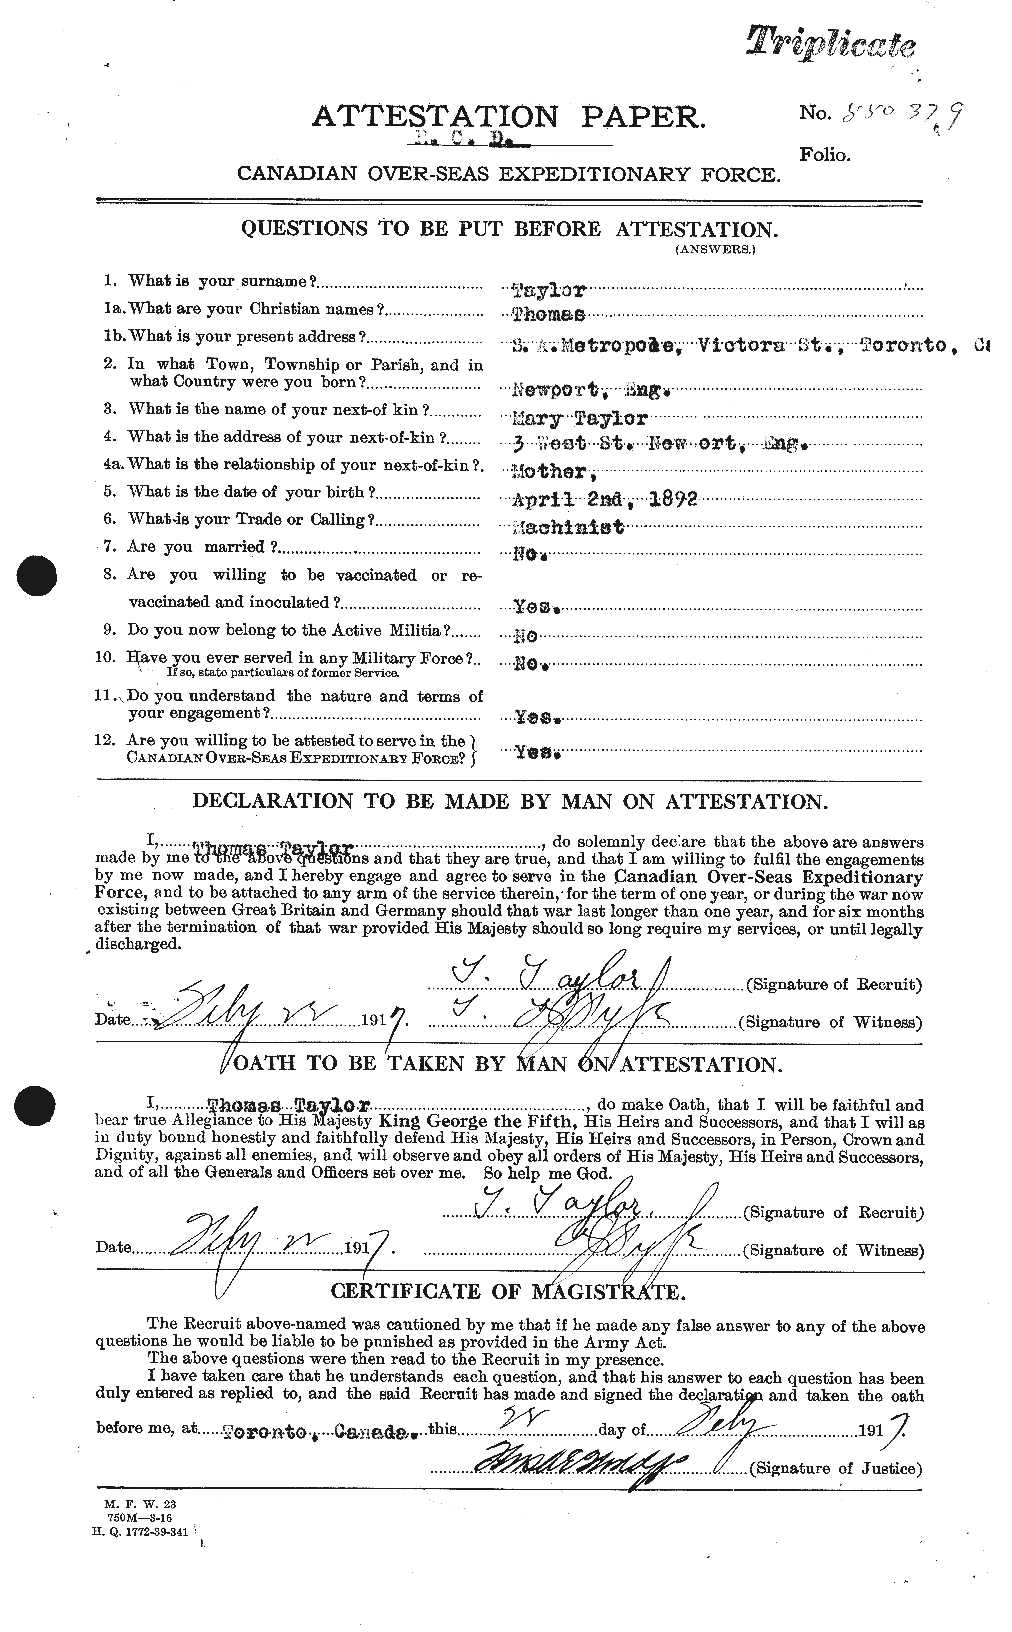 Personnel Records of the First World War - CEF 627943a